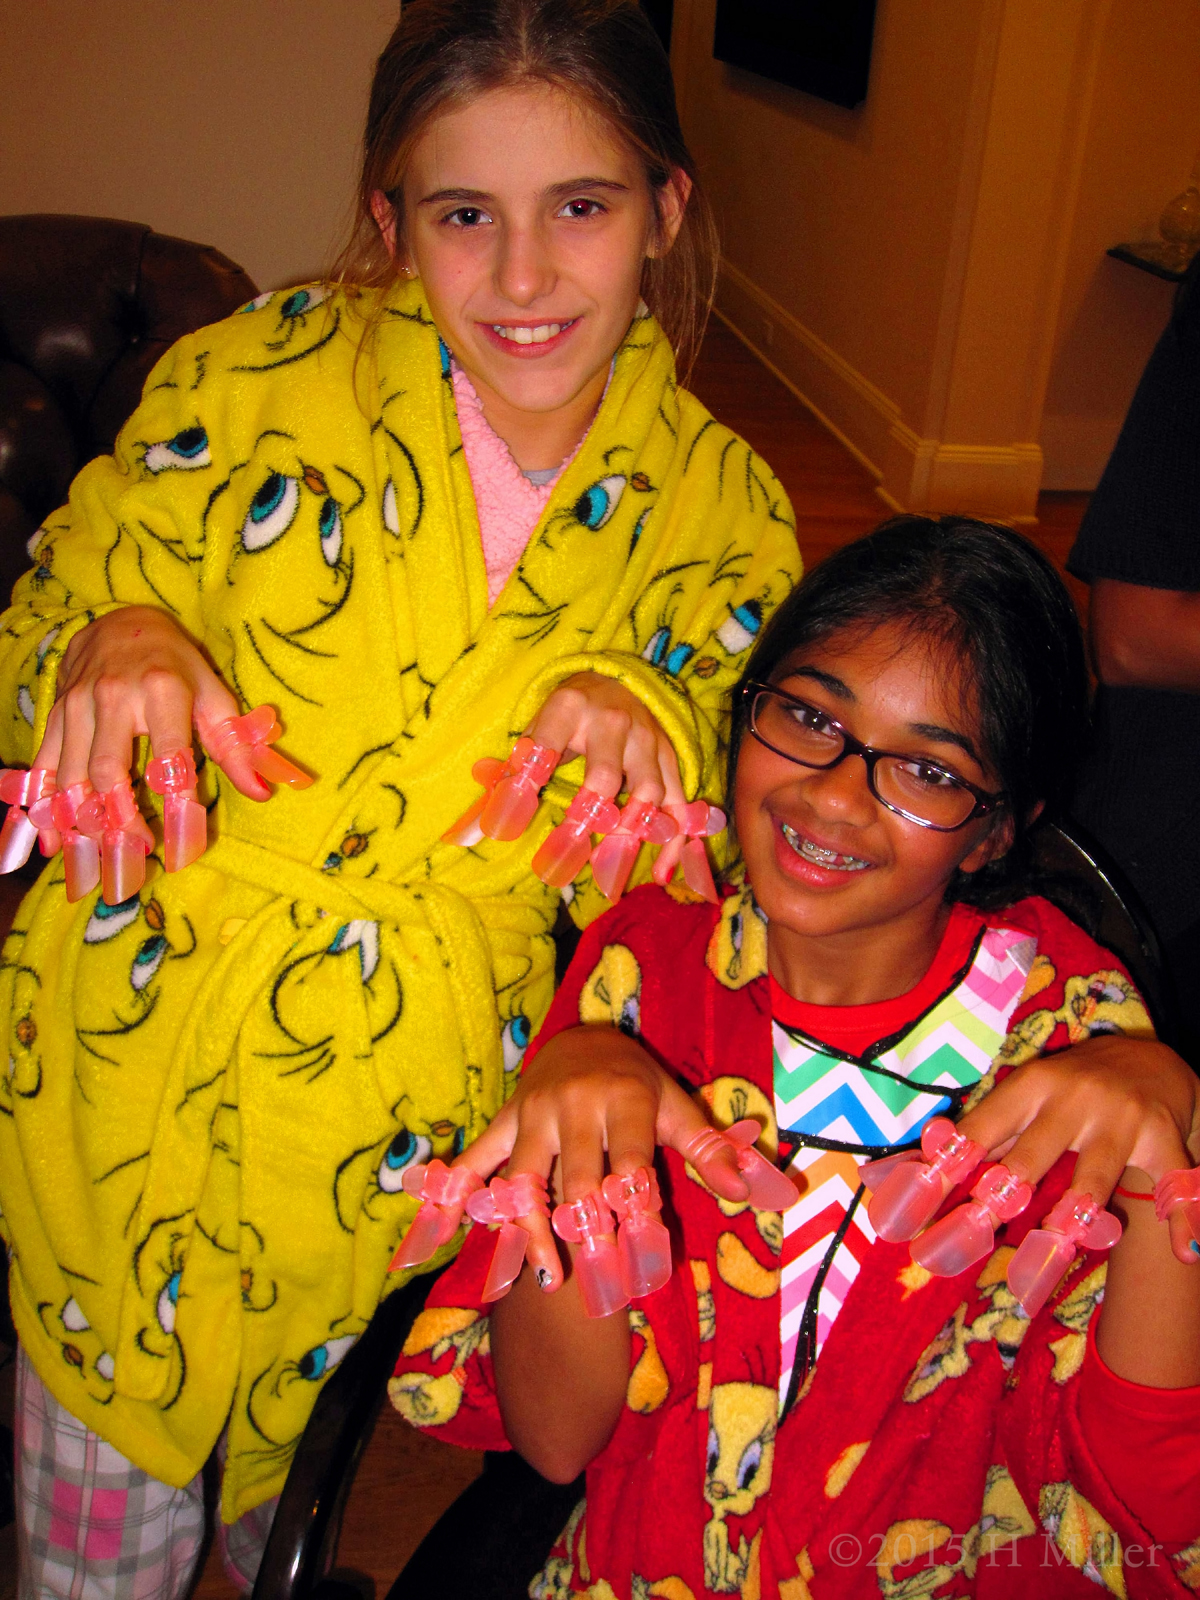 The Birthday Girl And Her Friend With Her Manicure And Nail Protectors At The Kids Home Spa 